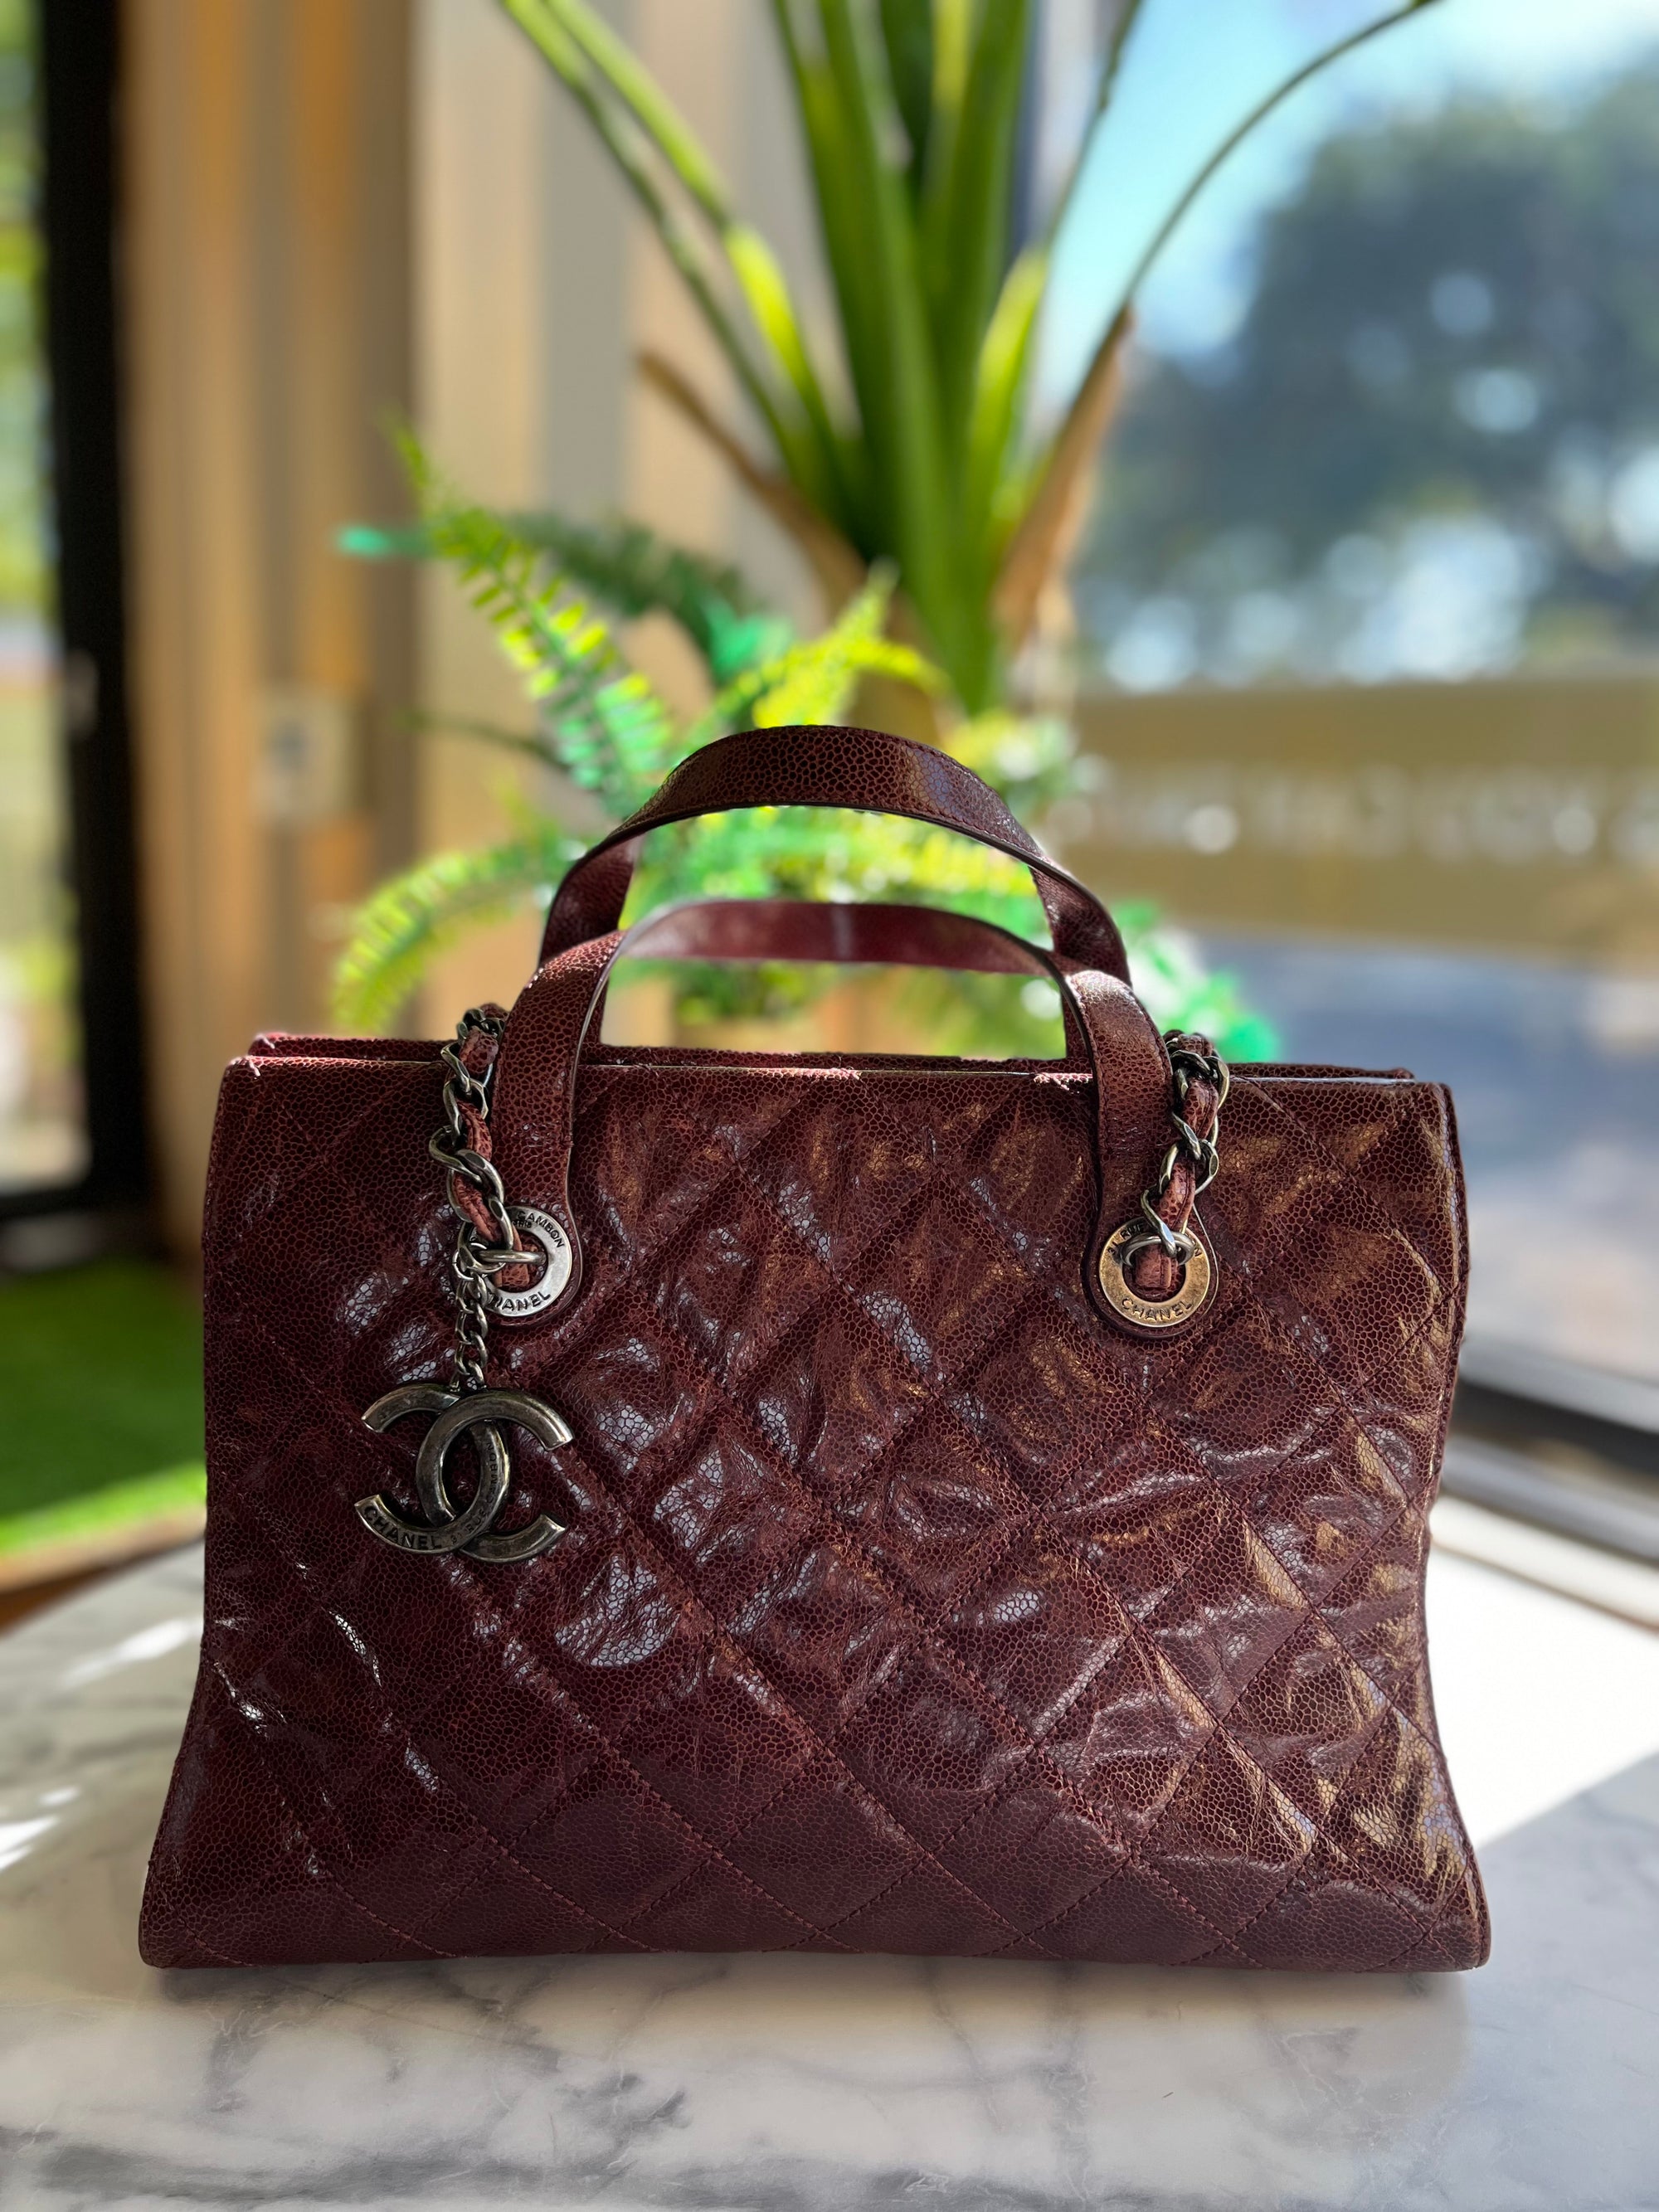 CHANEL Burgundy CC Crave Tote